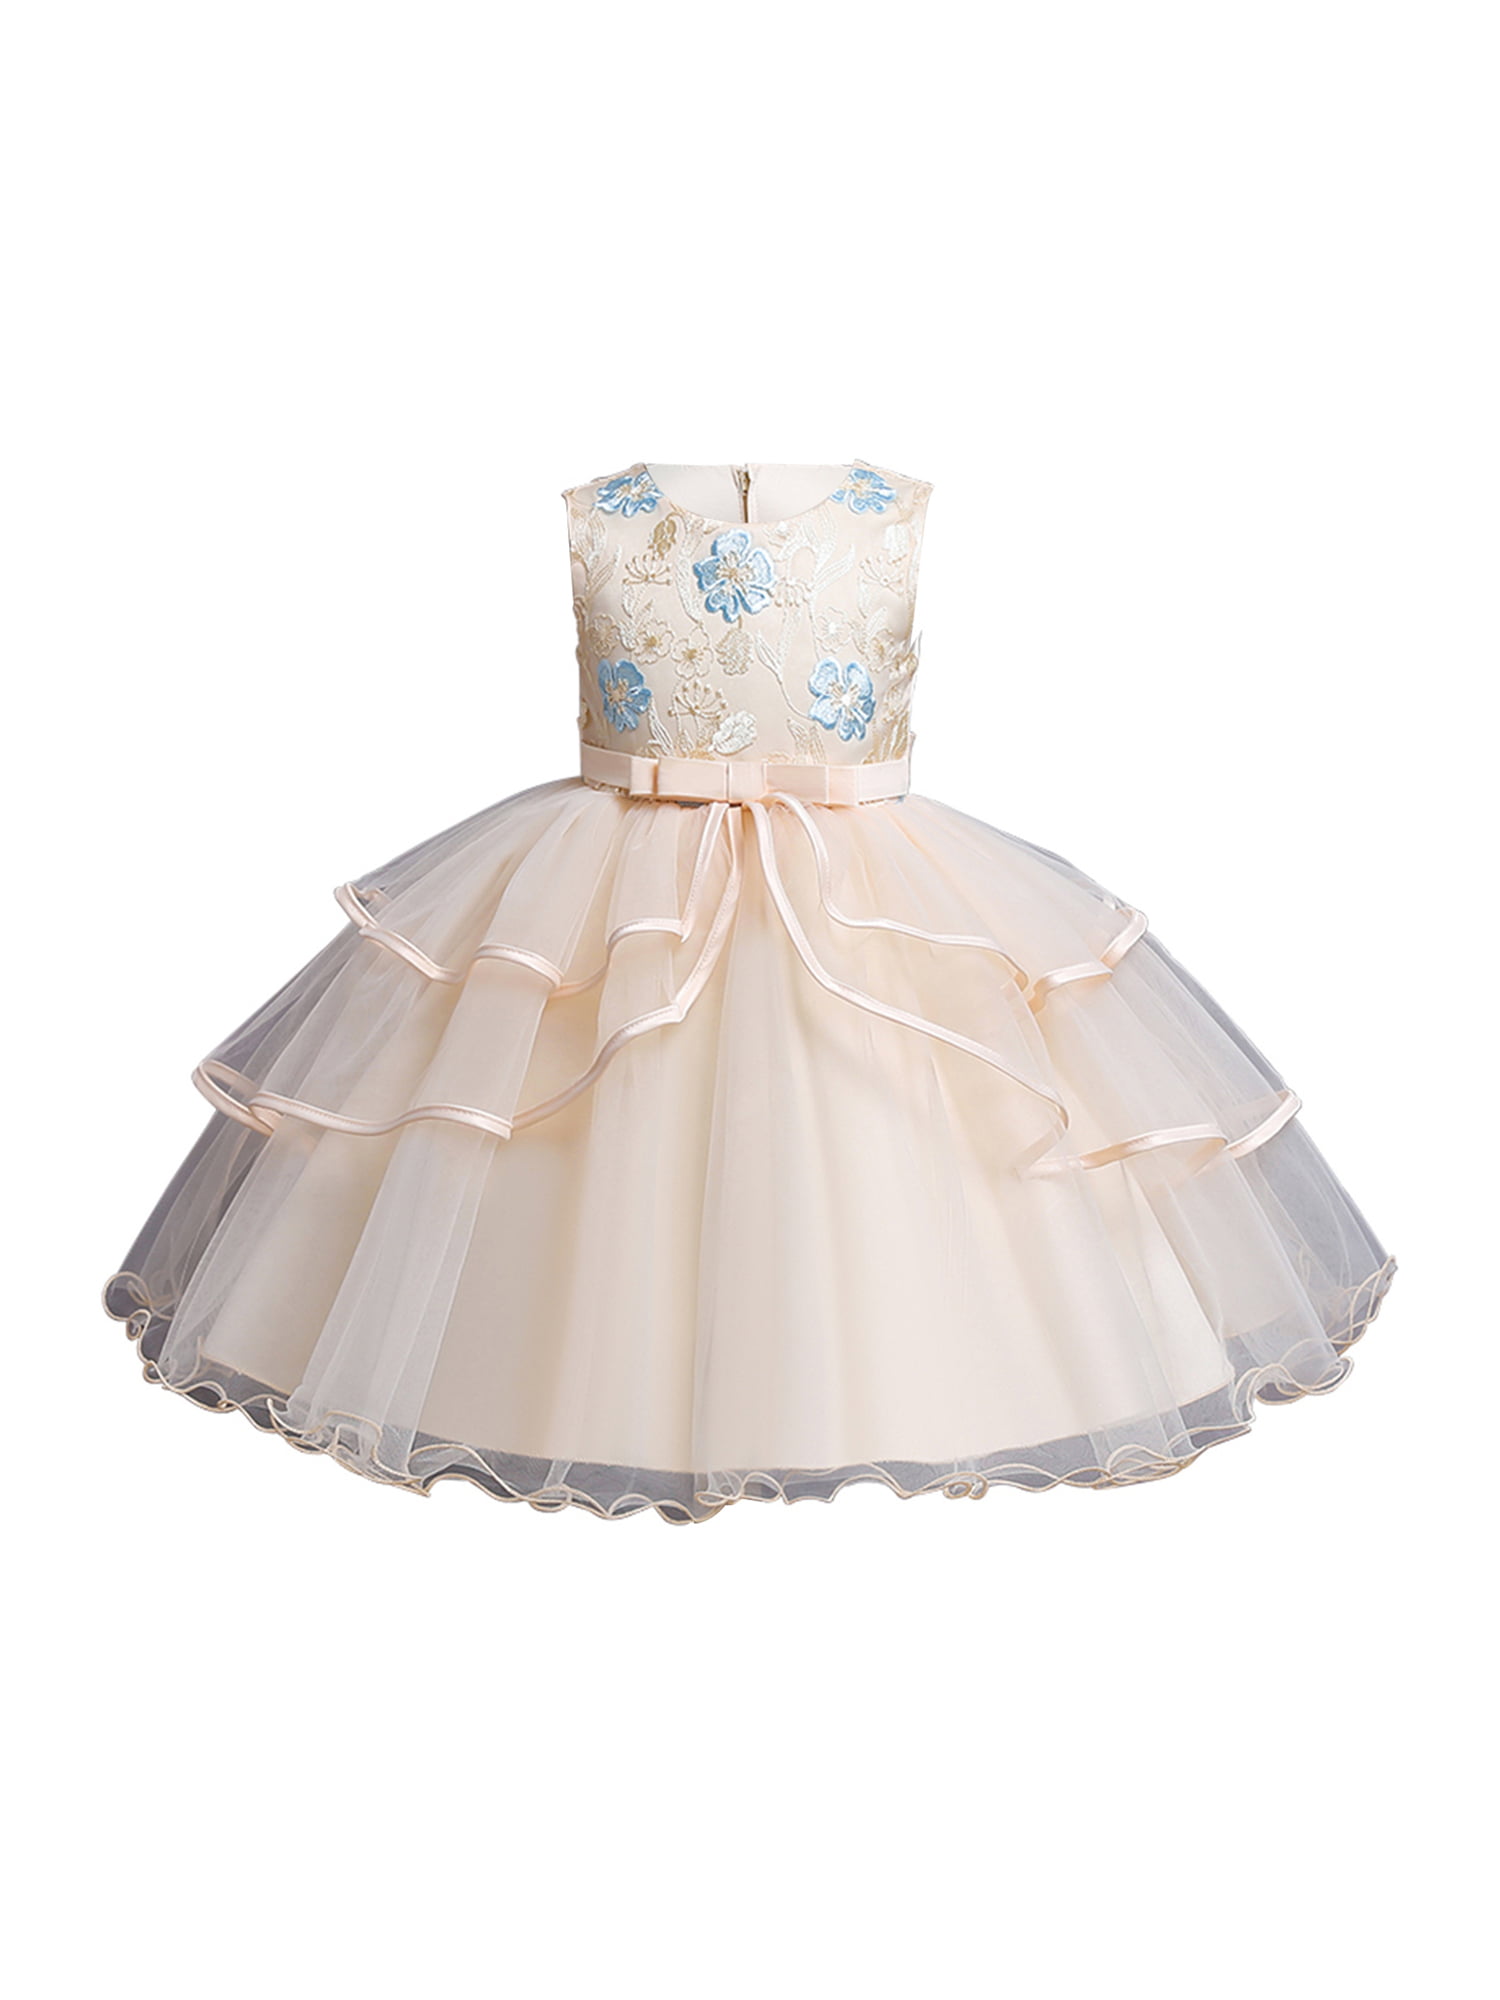 Details about   New Toddlers Girls Wedding Princess Kids Baby Party Pageant Lace clothing Dress 